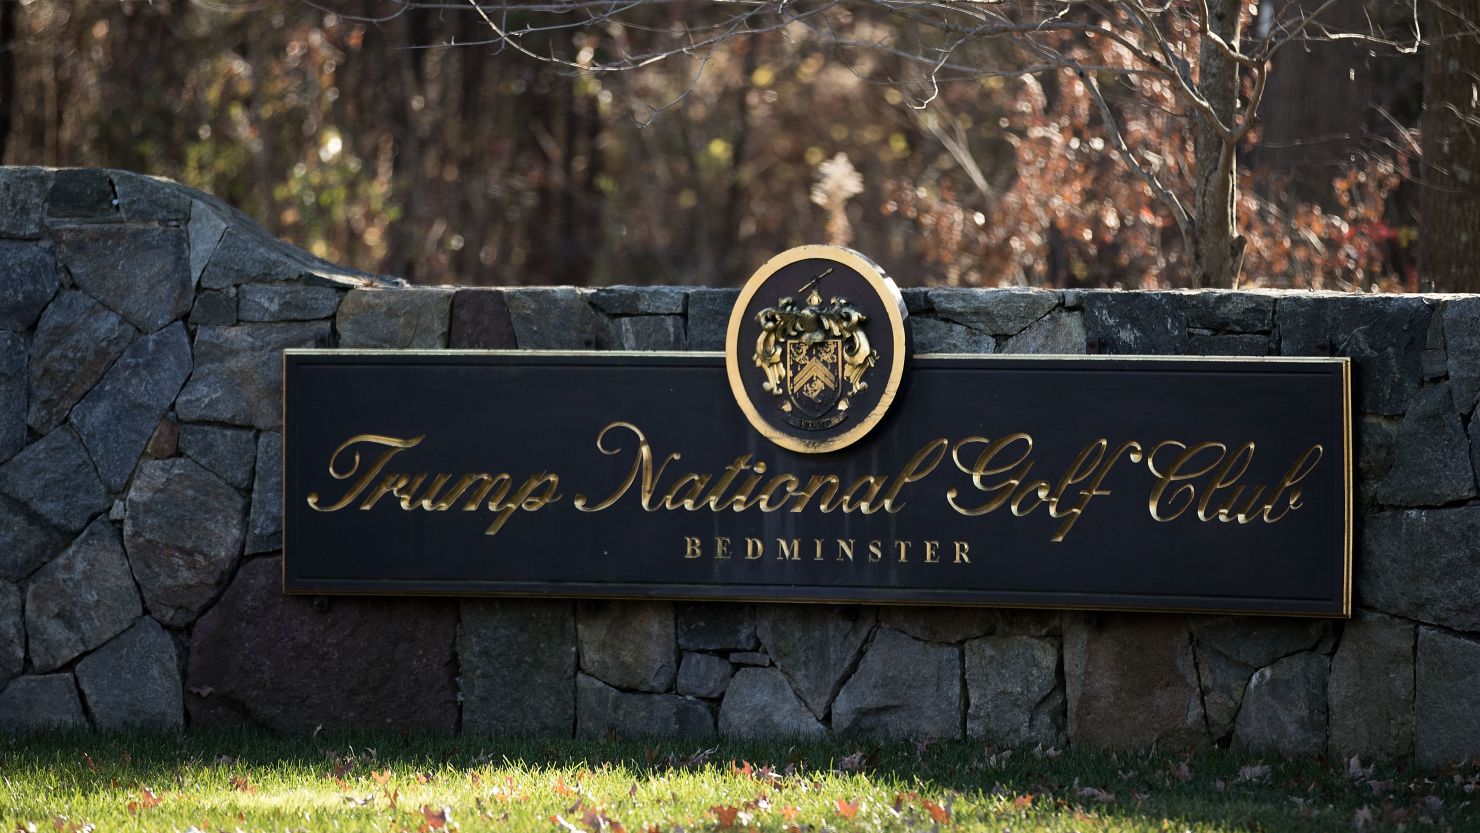 A view of the entrance to Trump National Golf Club, Bedminster, New Jersey.